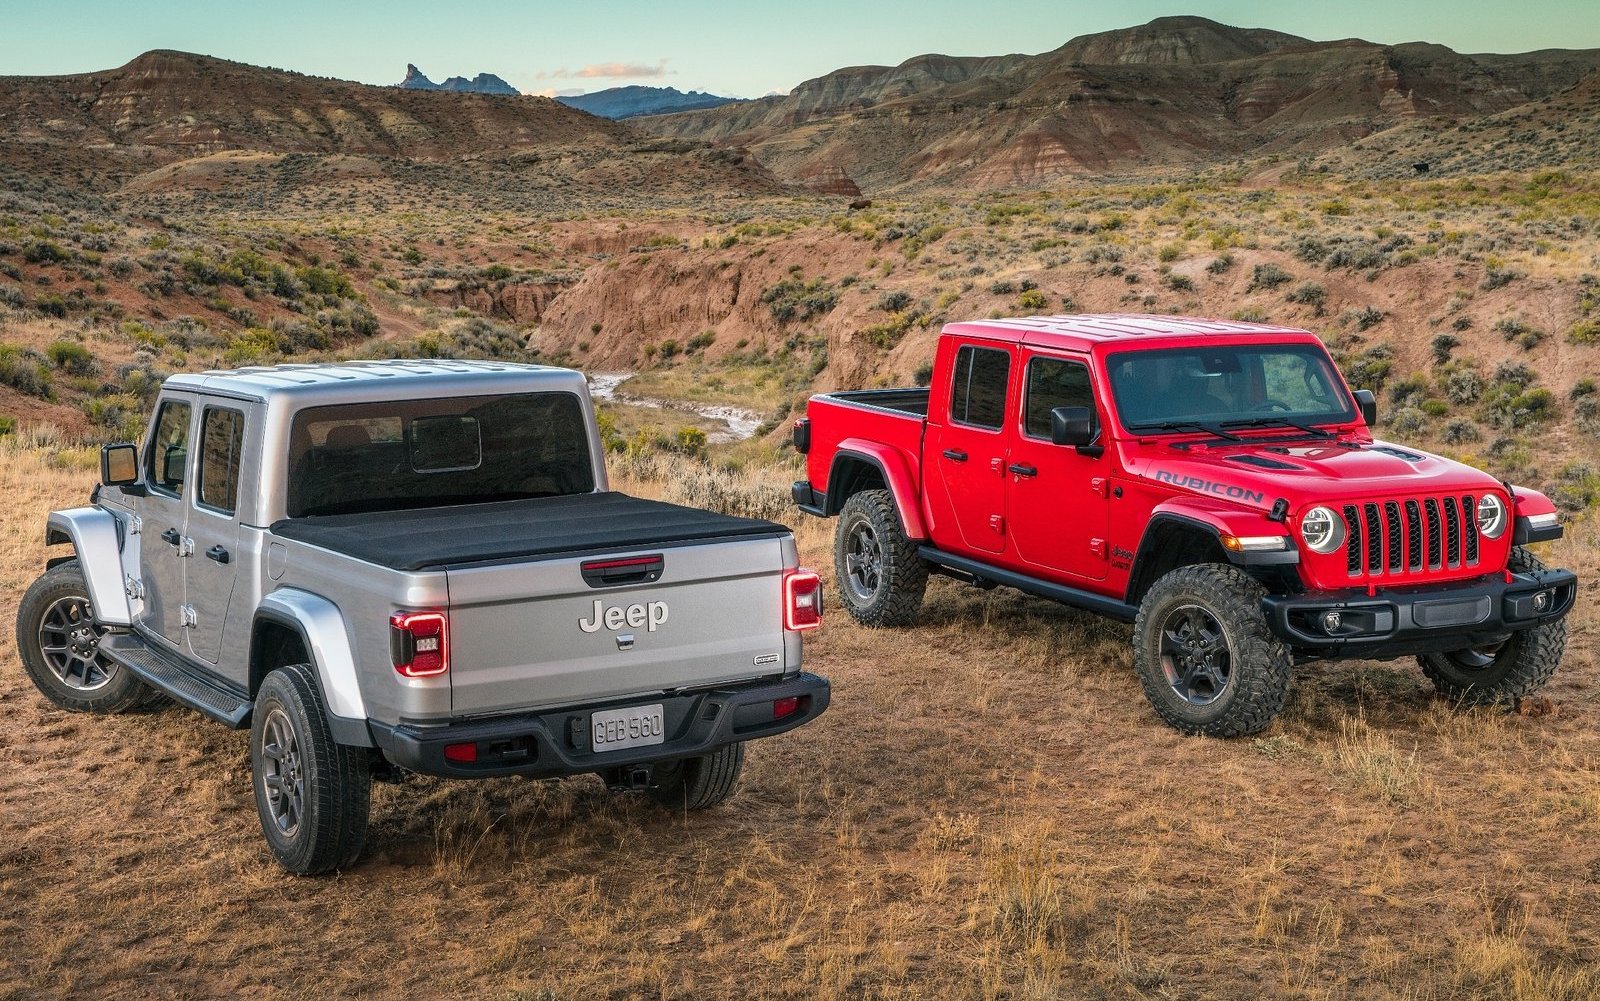 2020 Jeep Gladiator ute now on sale in Australia, arrives May